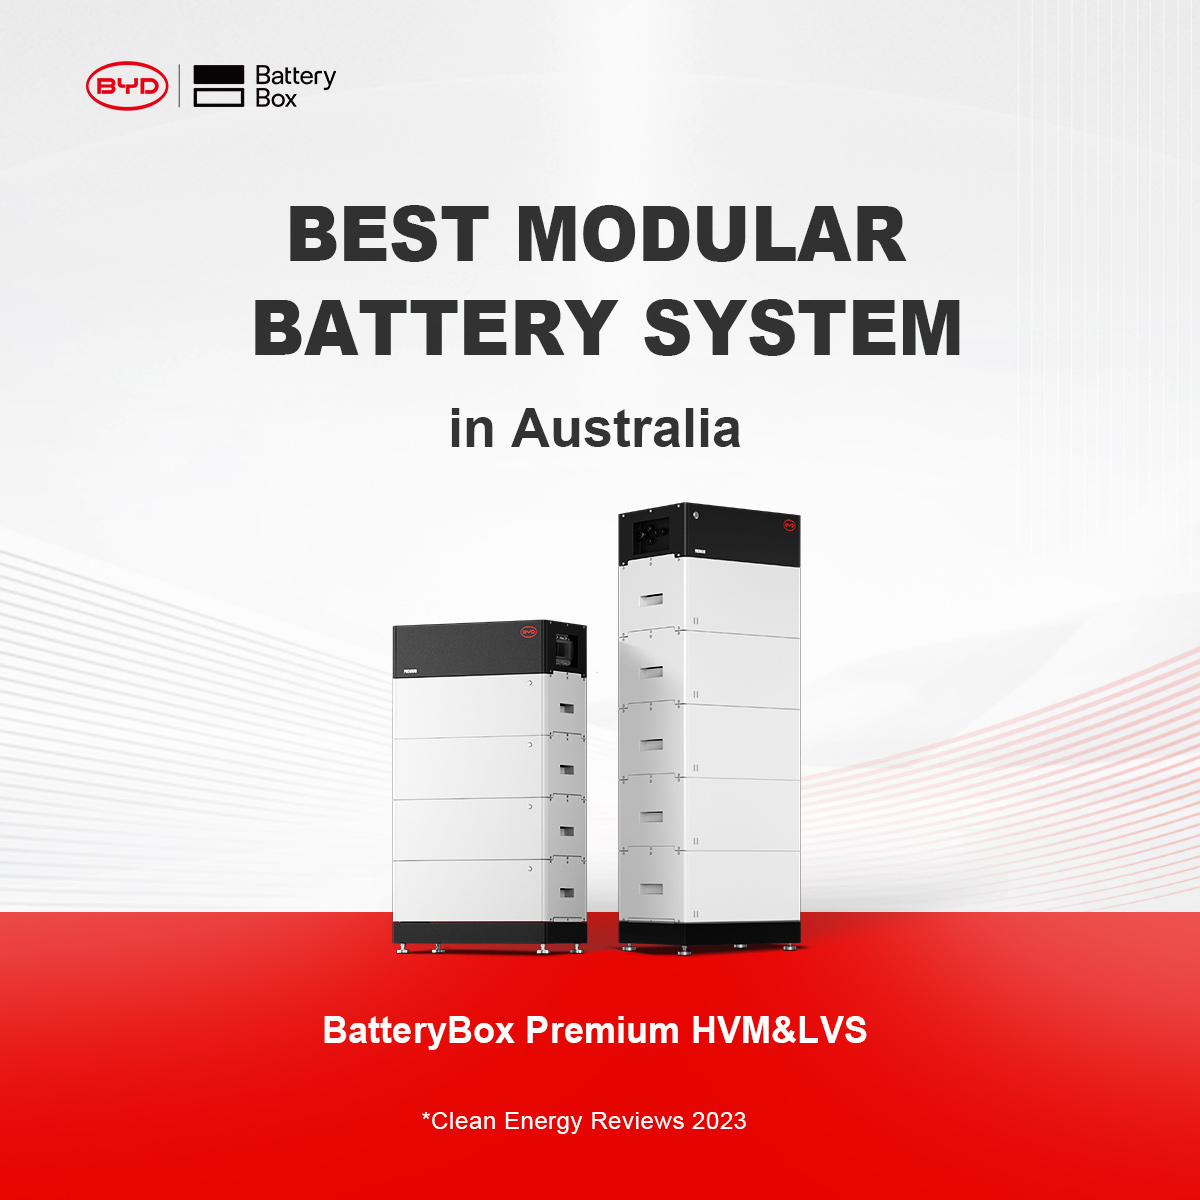 'BYD pioneered the modular tower battery concept, with the first generation stackable system launched in 2017.' #BYDBatteryBox #CleanEnergy